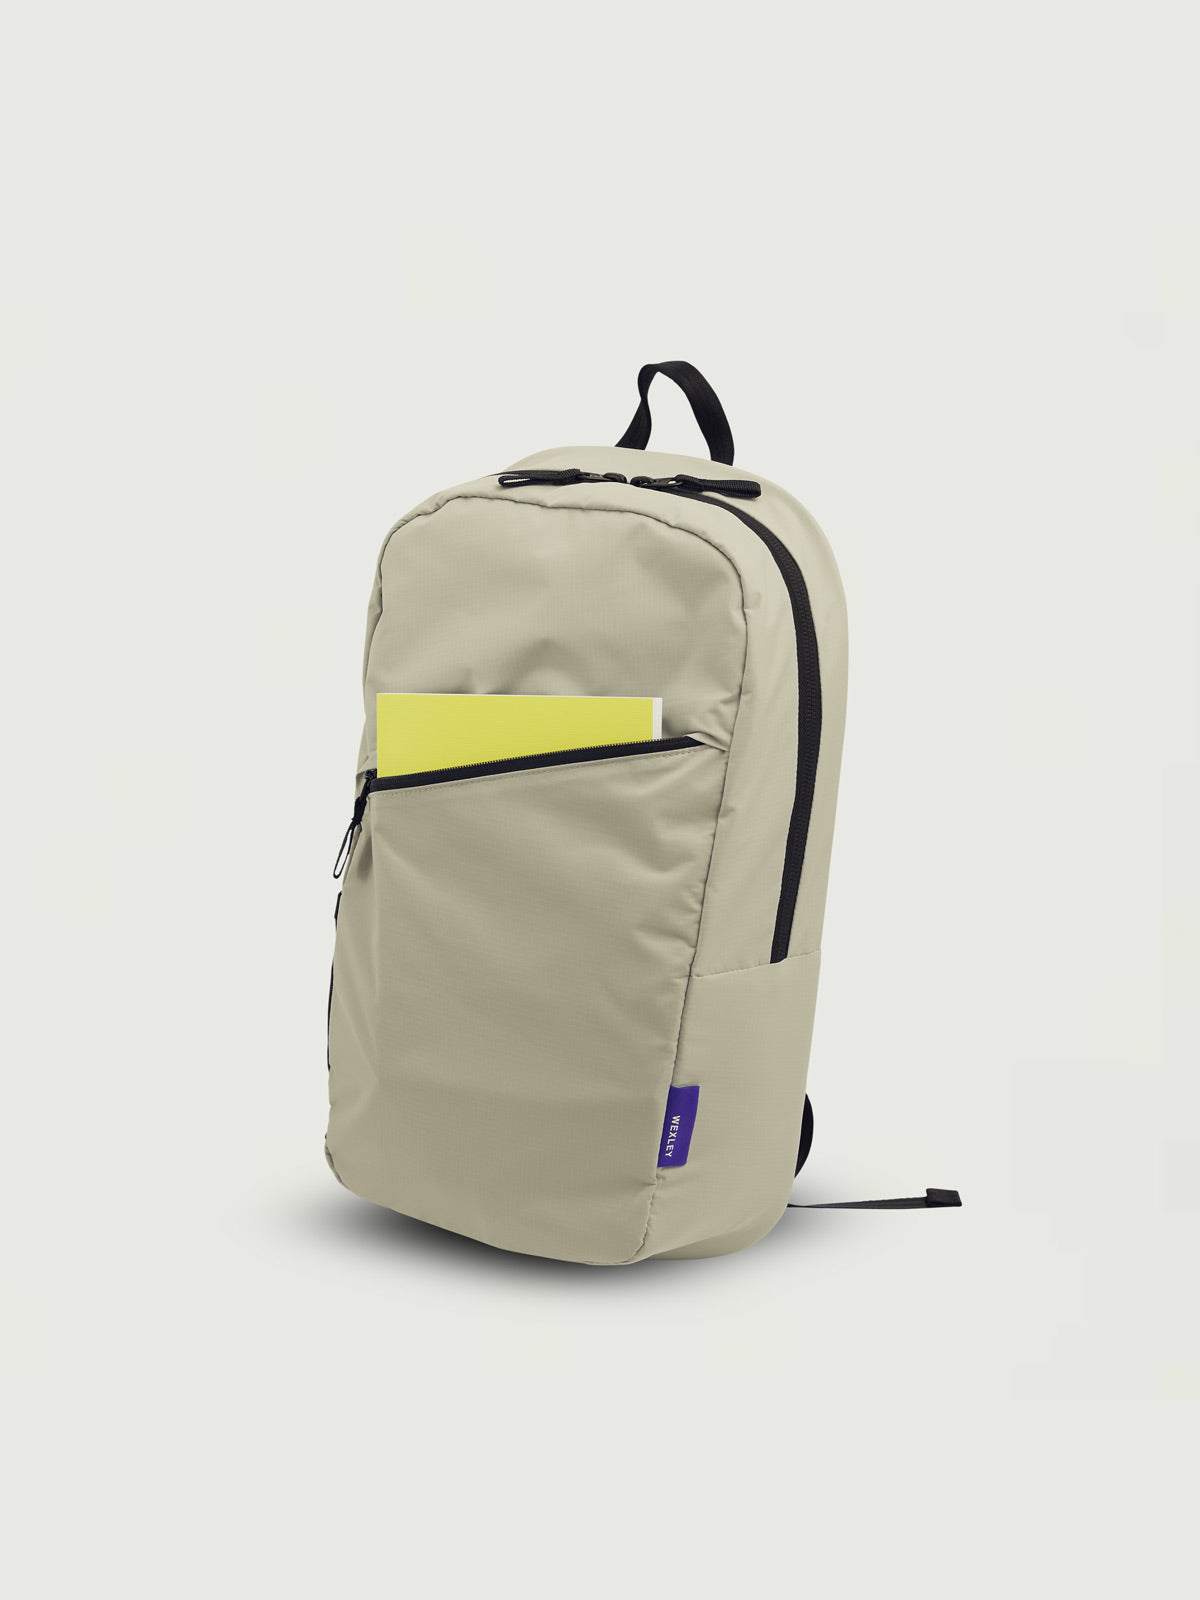 STAHL DAYPACK LIGHTWEIGHT RECYCLED RIPSTOP